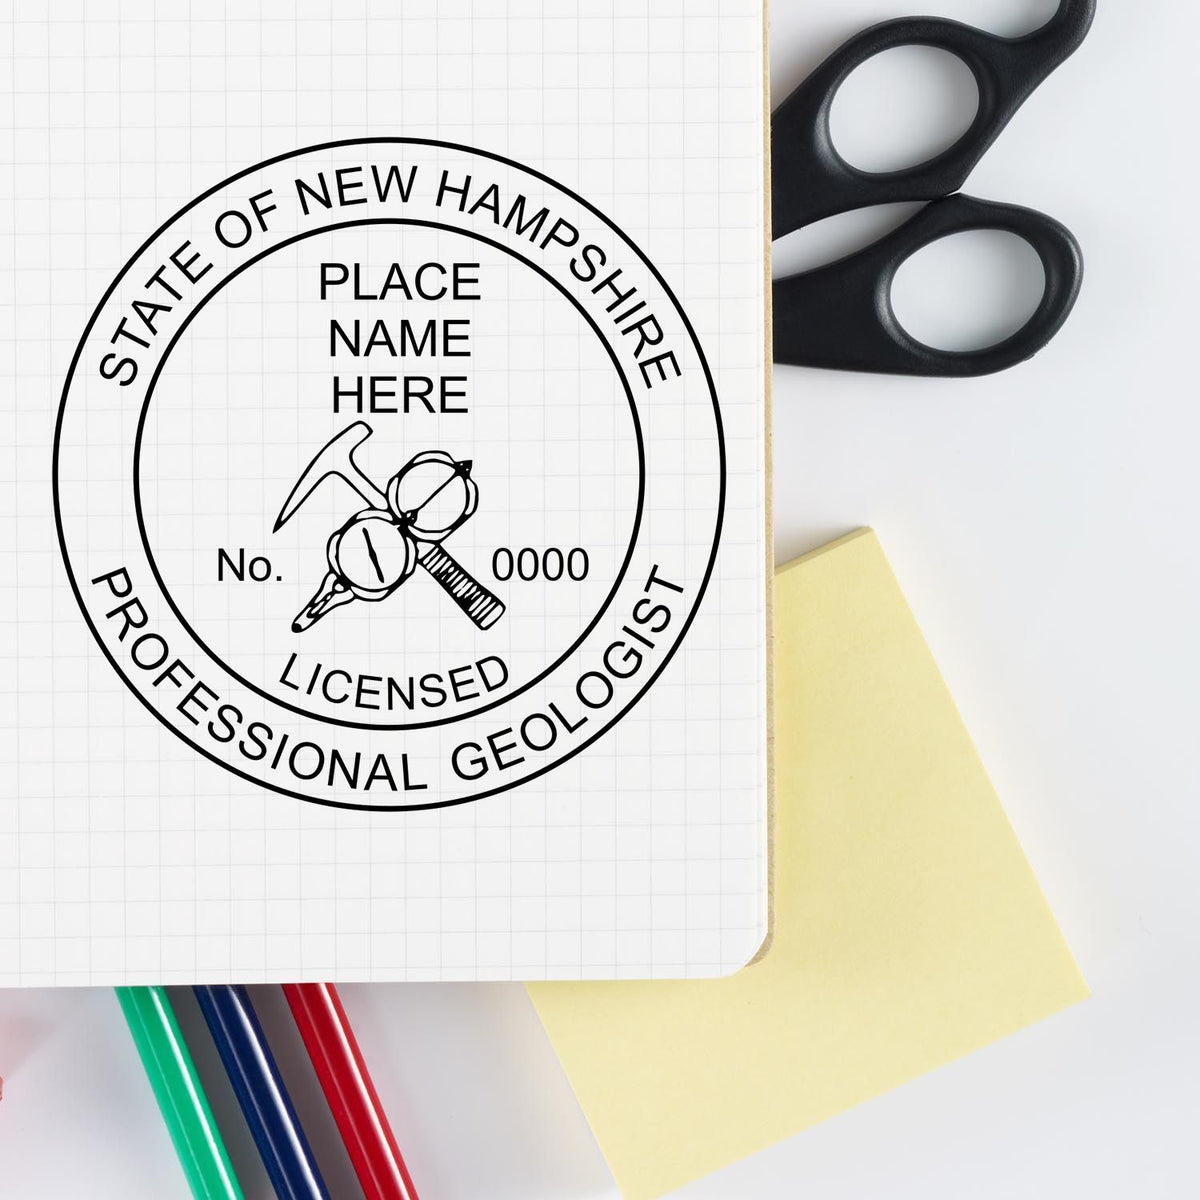 A stamped imprint of the Digital New Hampshire Geologist Stamp, Electronic Seal for New Hampshire Geologist in this stylish lifestyle photo, setting the tone for a unique and personalized product.